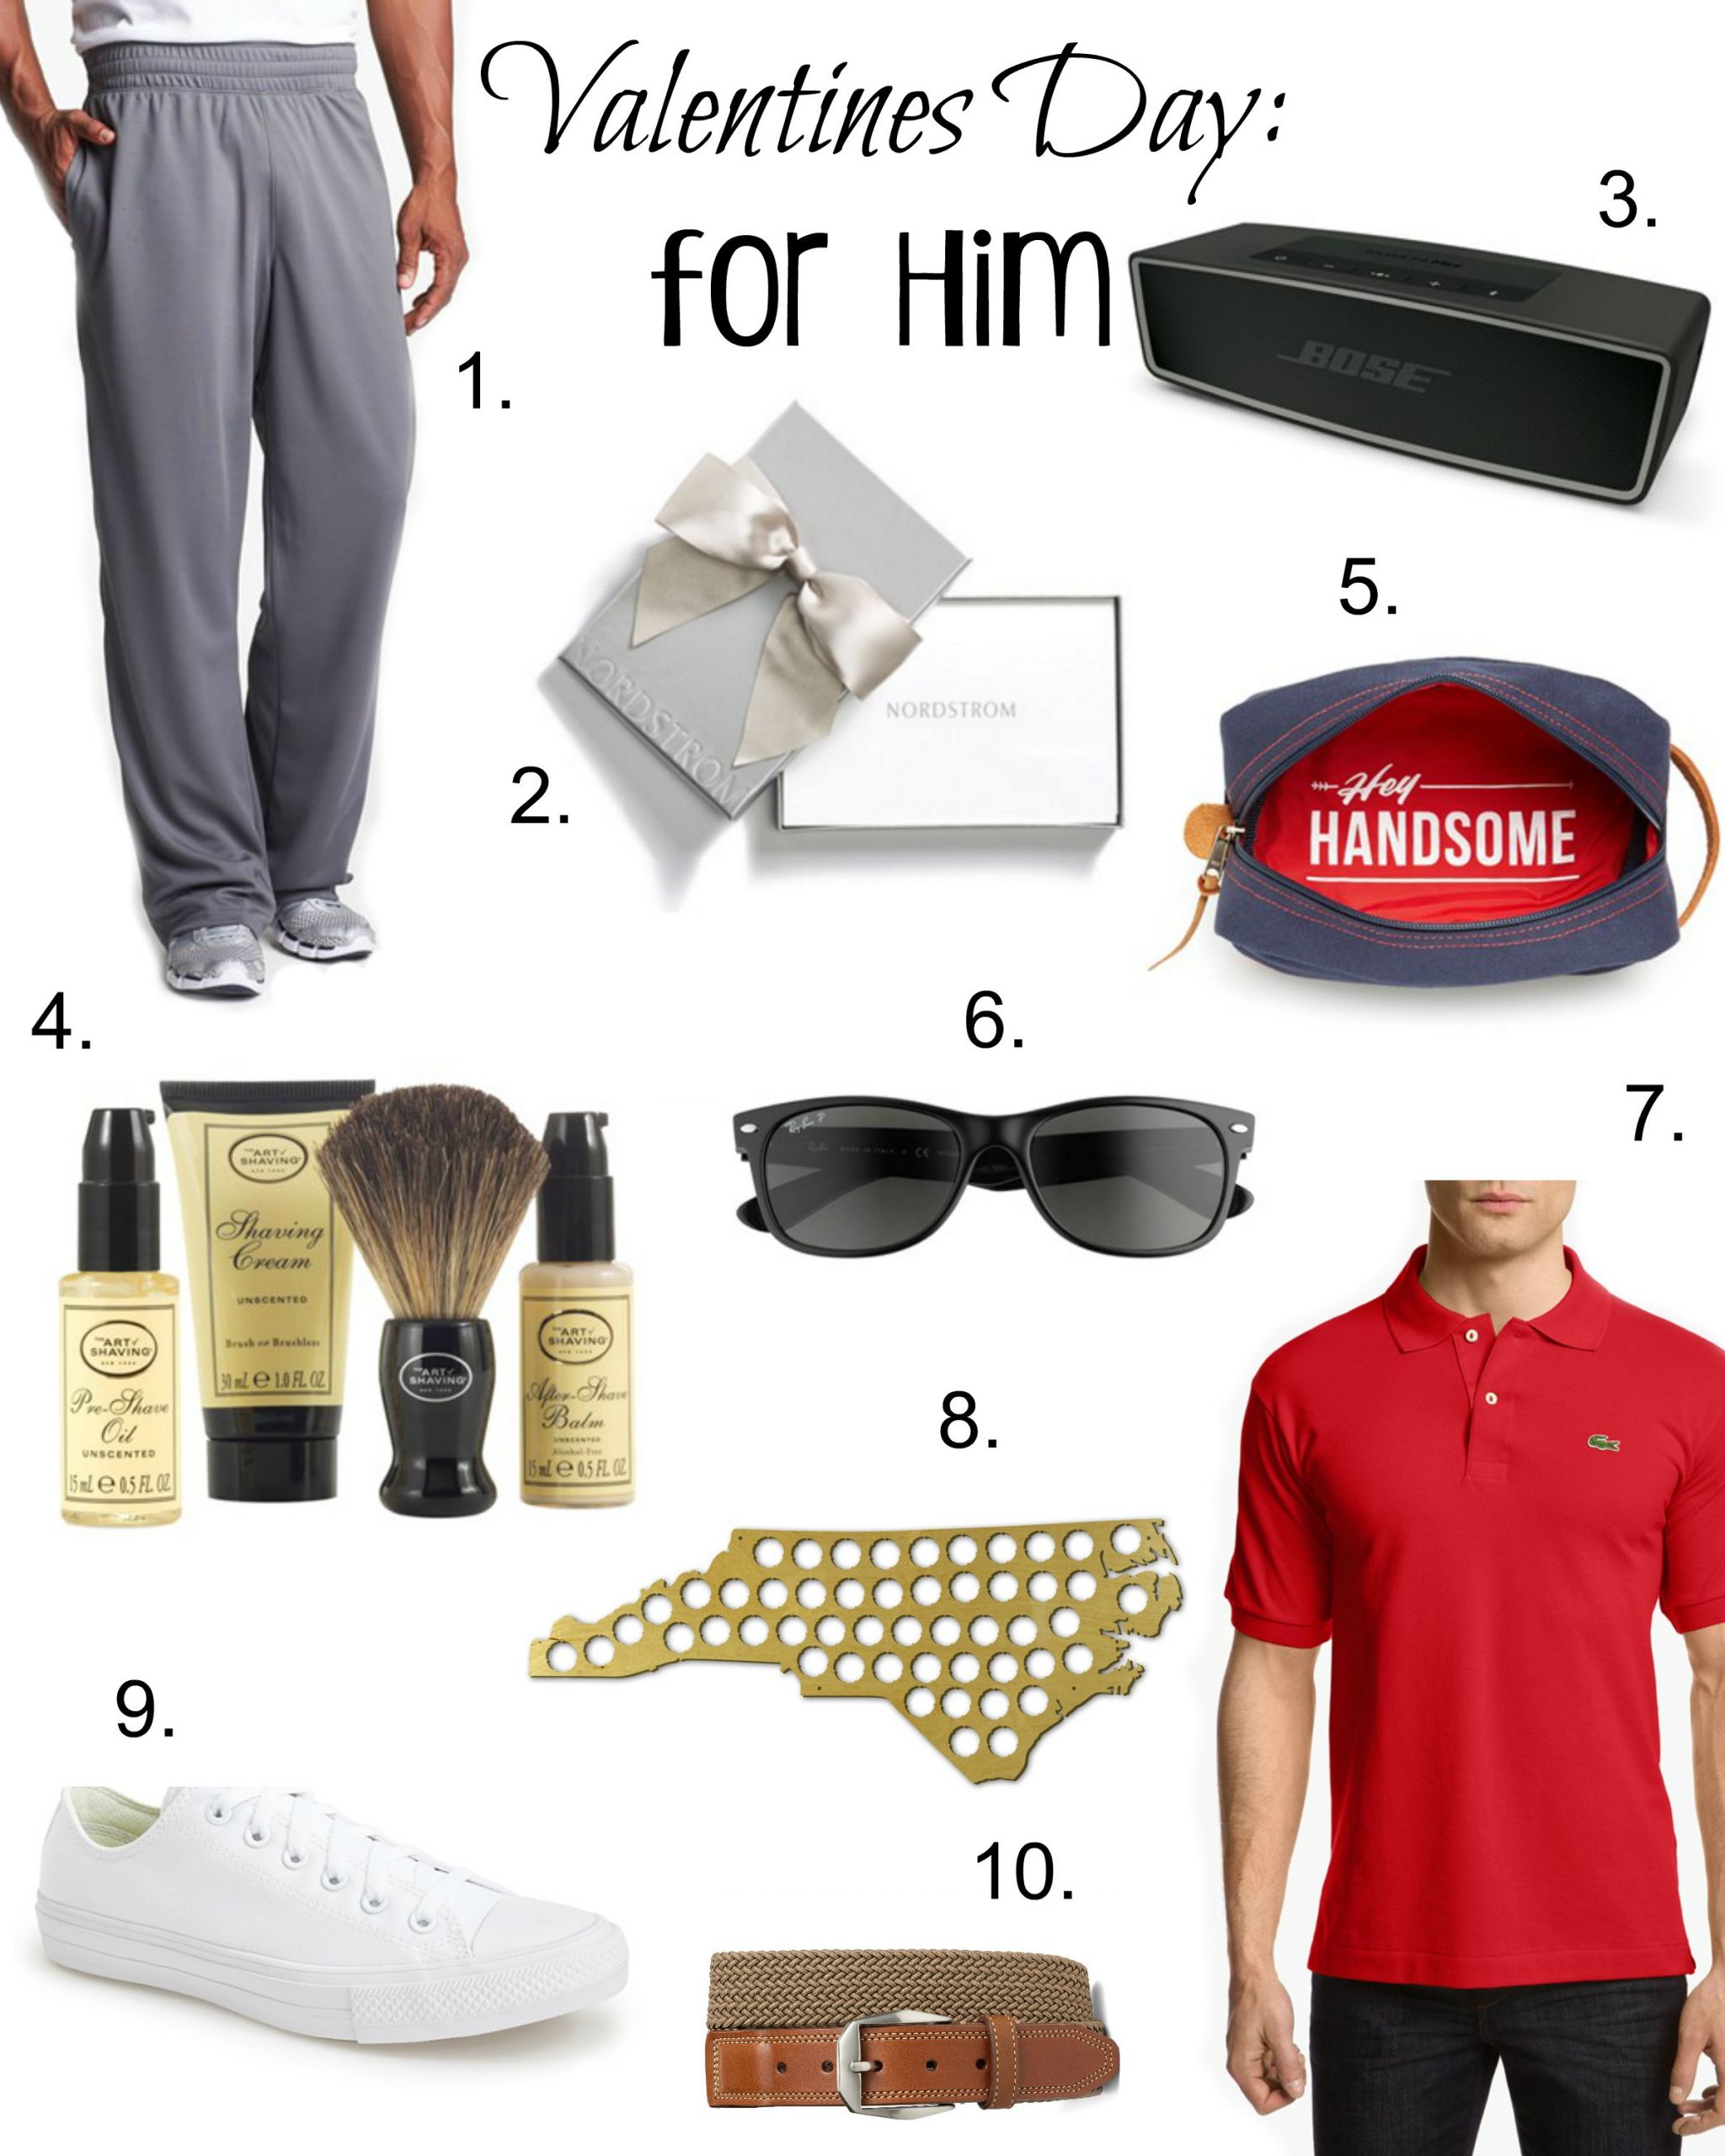 Valentines DIY Gifts For Him
 Top 10 Valentines Day Gifts For Him